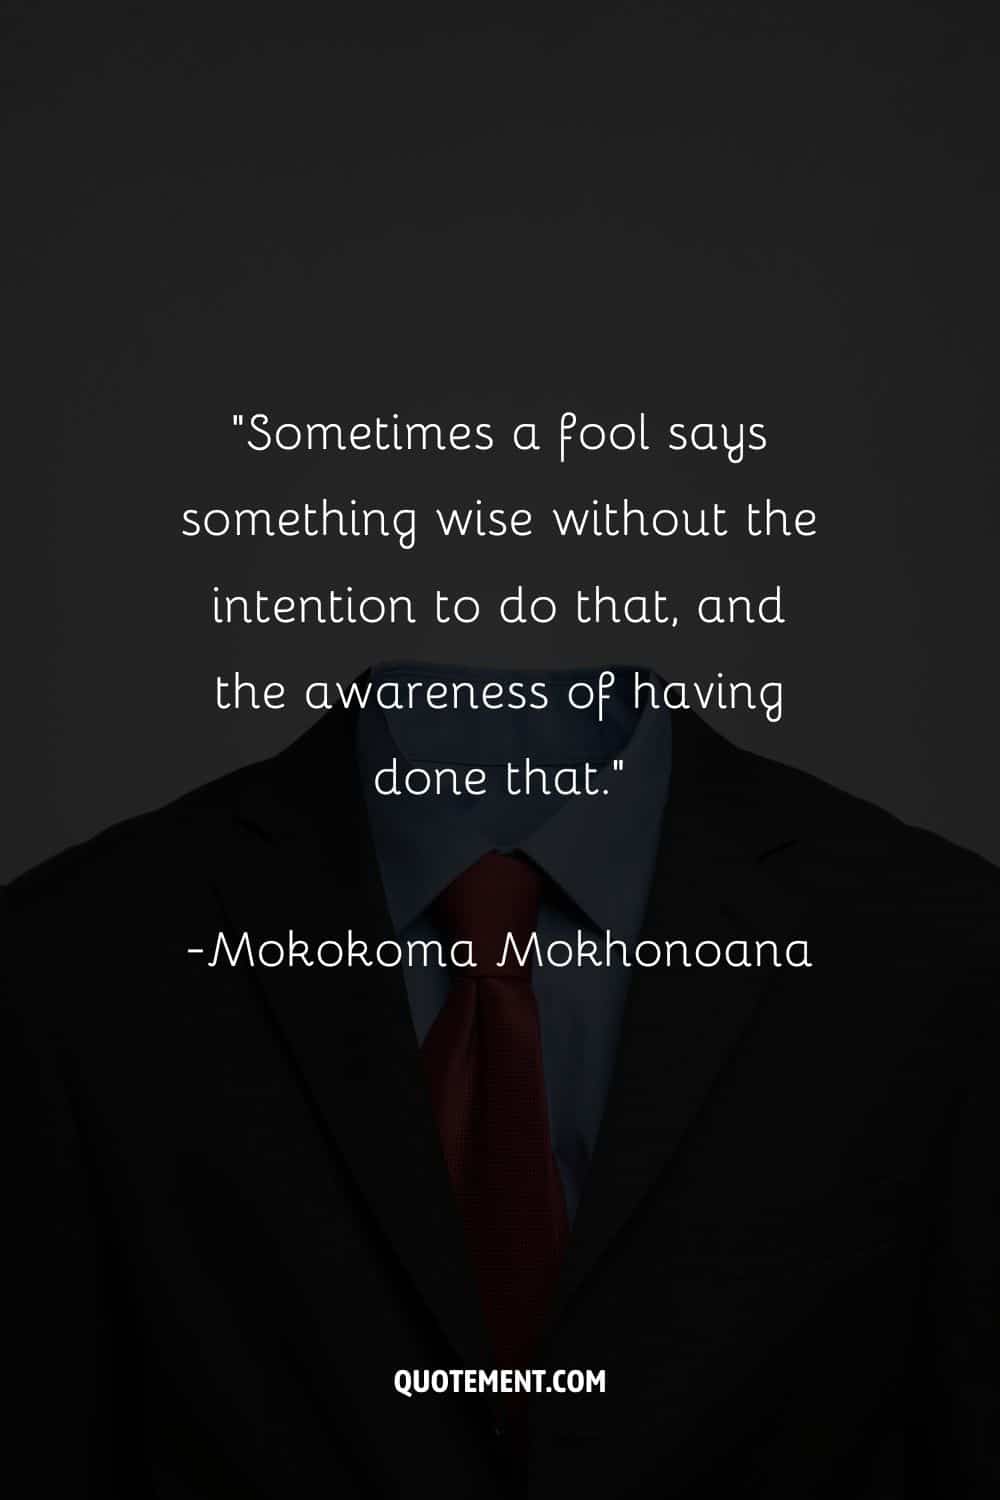 “Sometimes a fool says something wise without the intention to do that, and the awareness of having done that.”